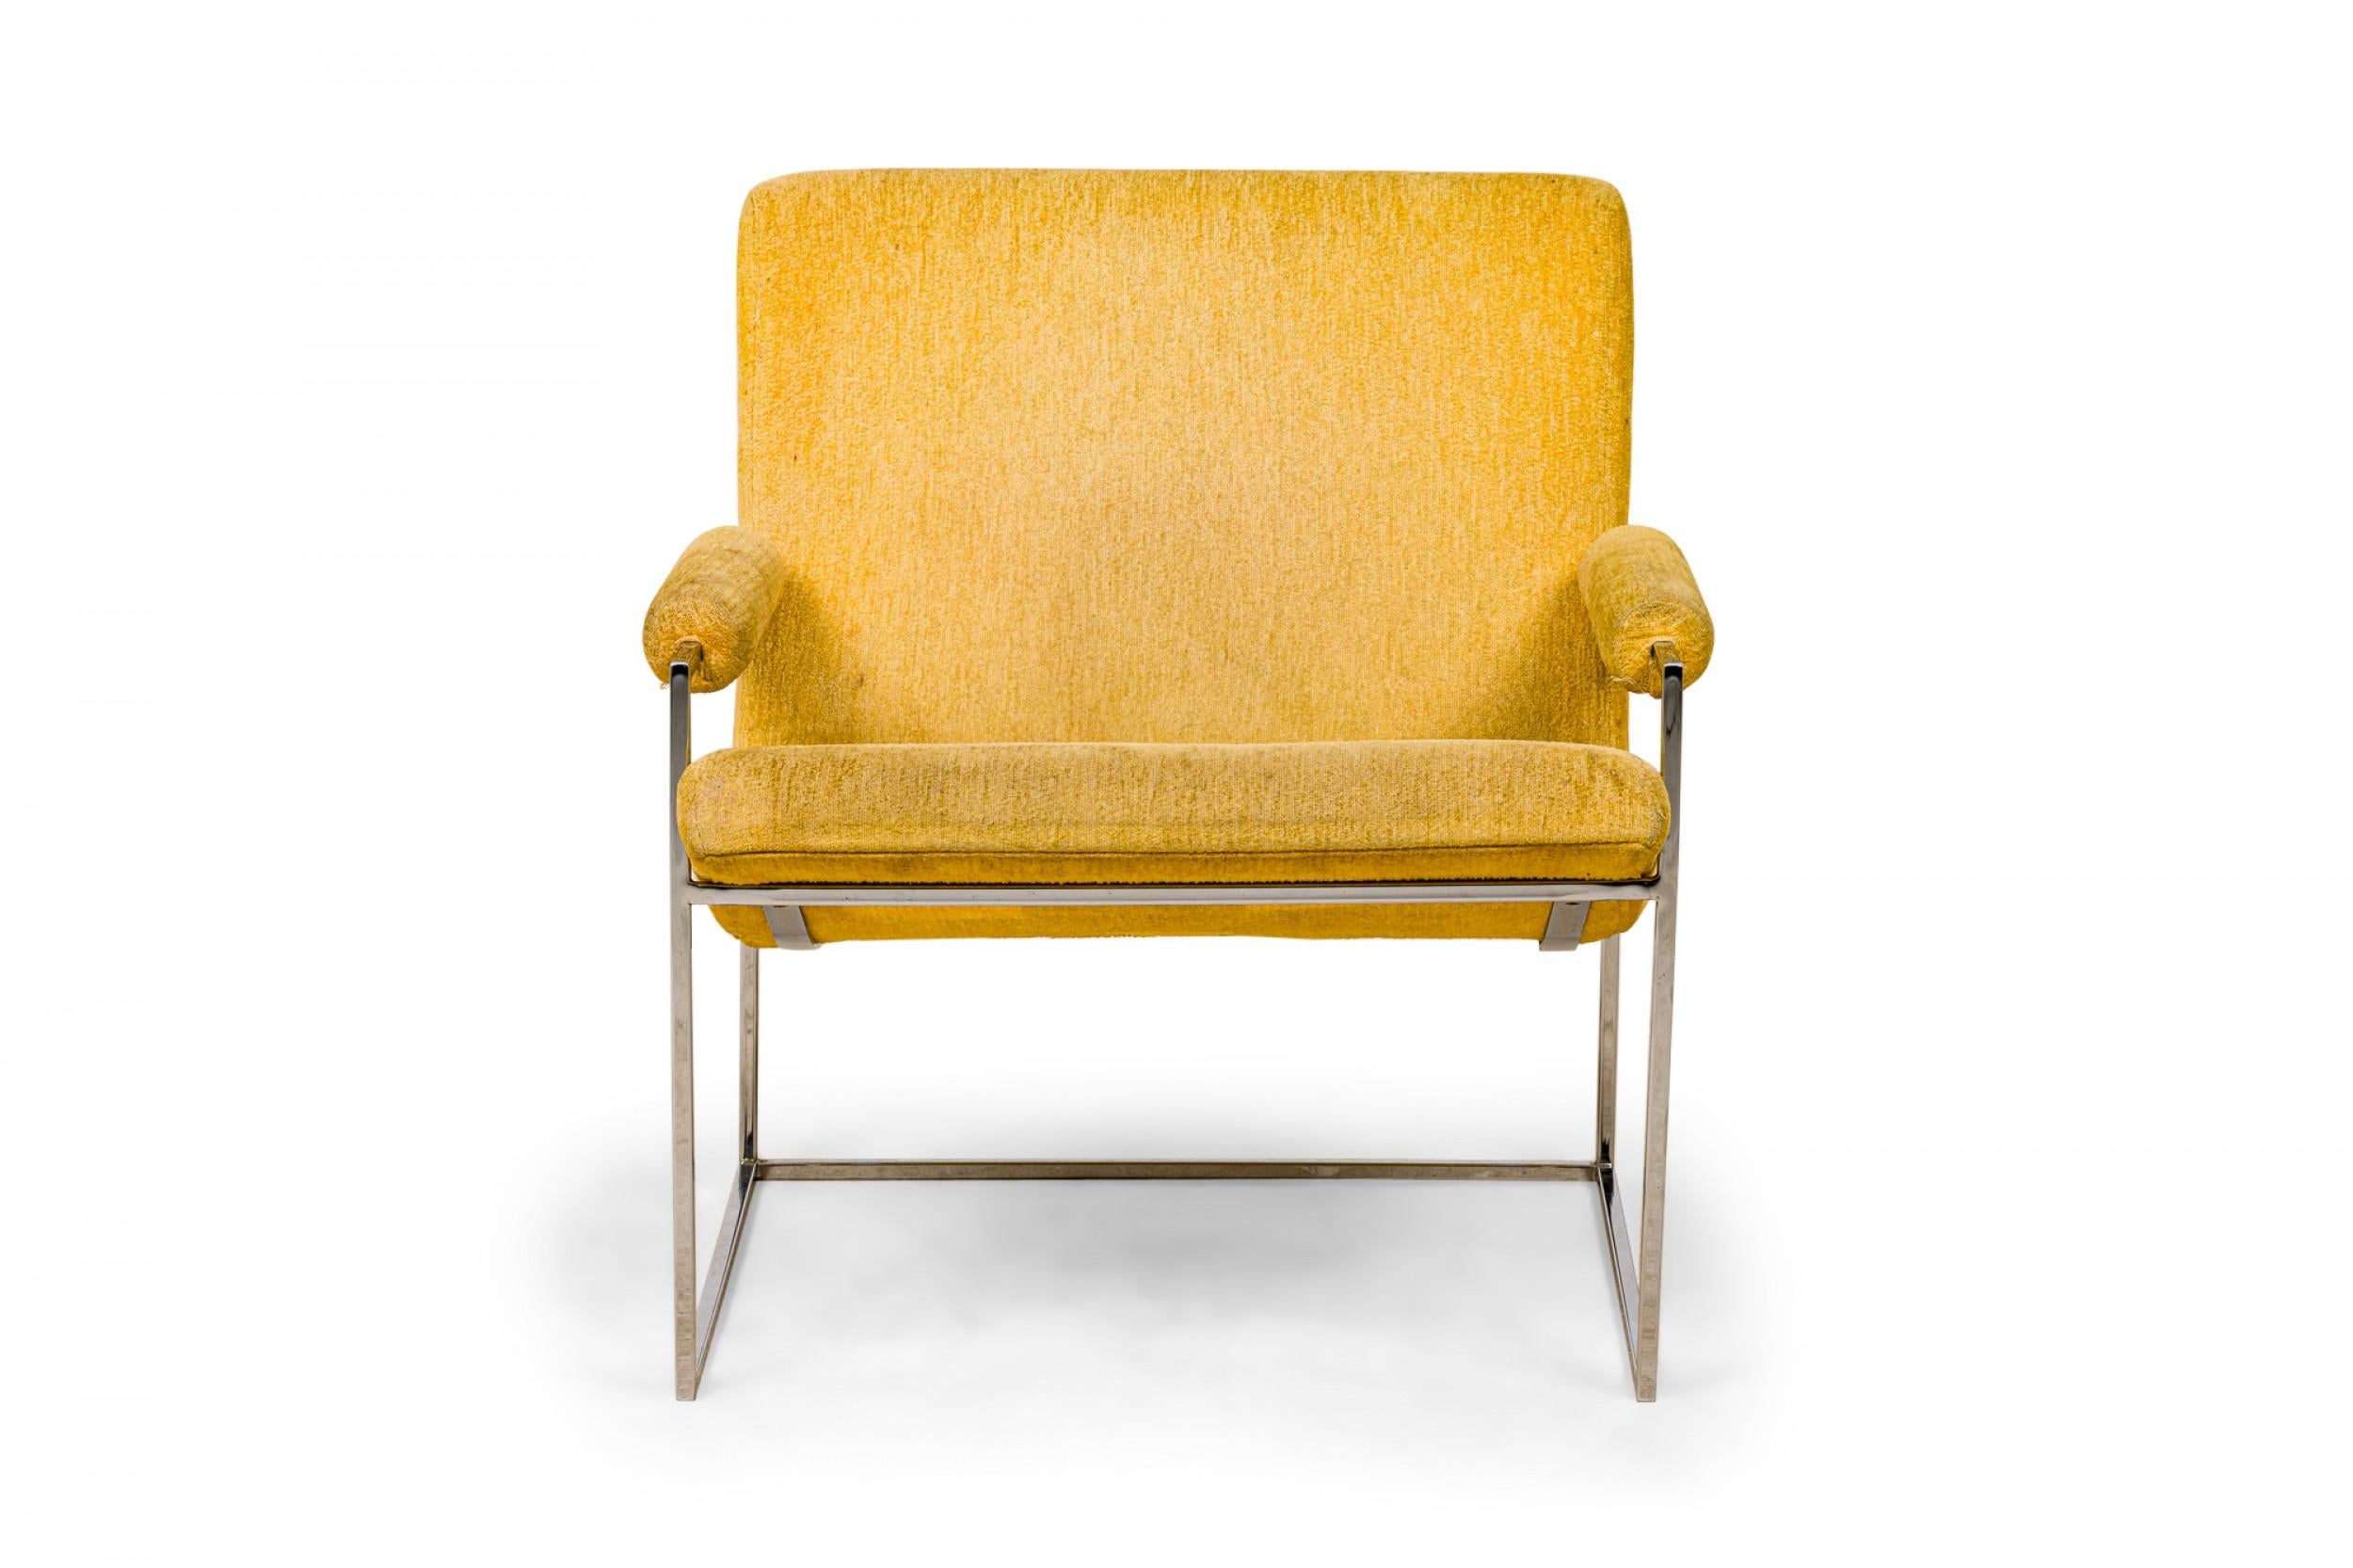 American Mid-Century scoop armchair with pale yellow velour upholstered seat, back, and arms with button tufted detail along the seam where the seat and back join, supported by a thin square tube chrome frame and legs. (MILO BAUGHMAN FOR THAYER